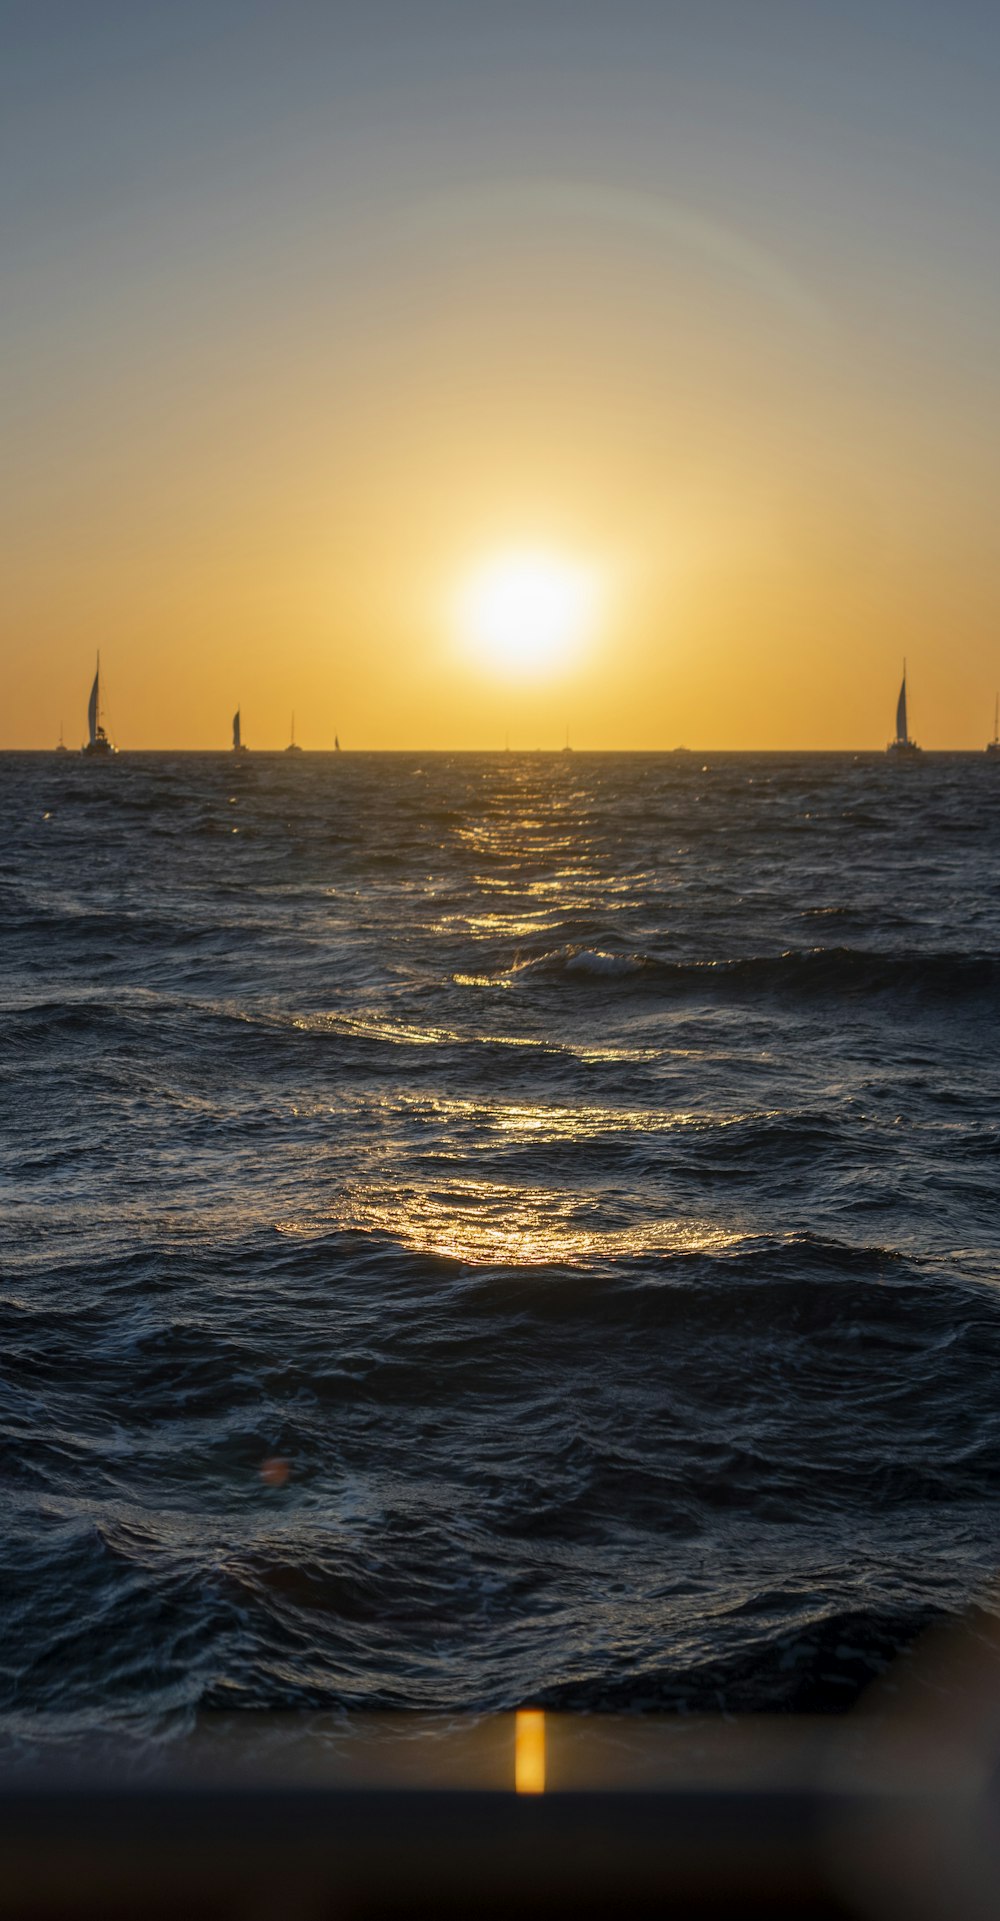 a body of water with boats in it and the sun setting